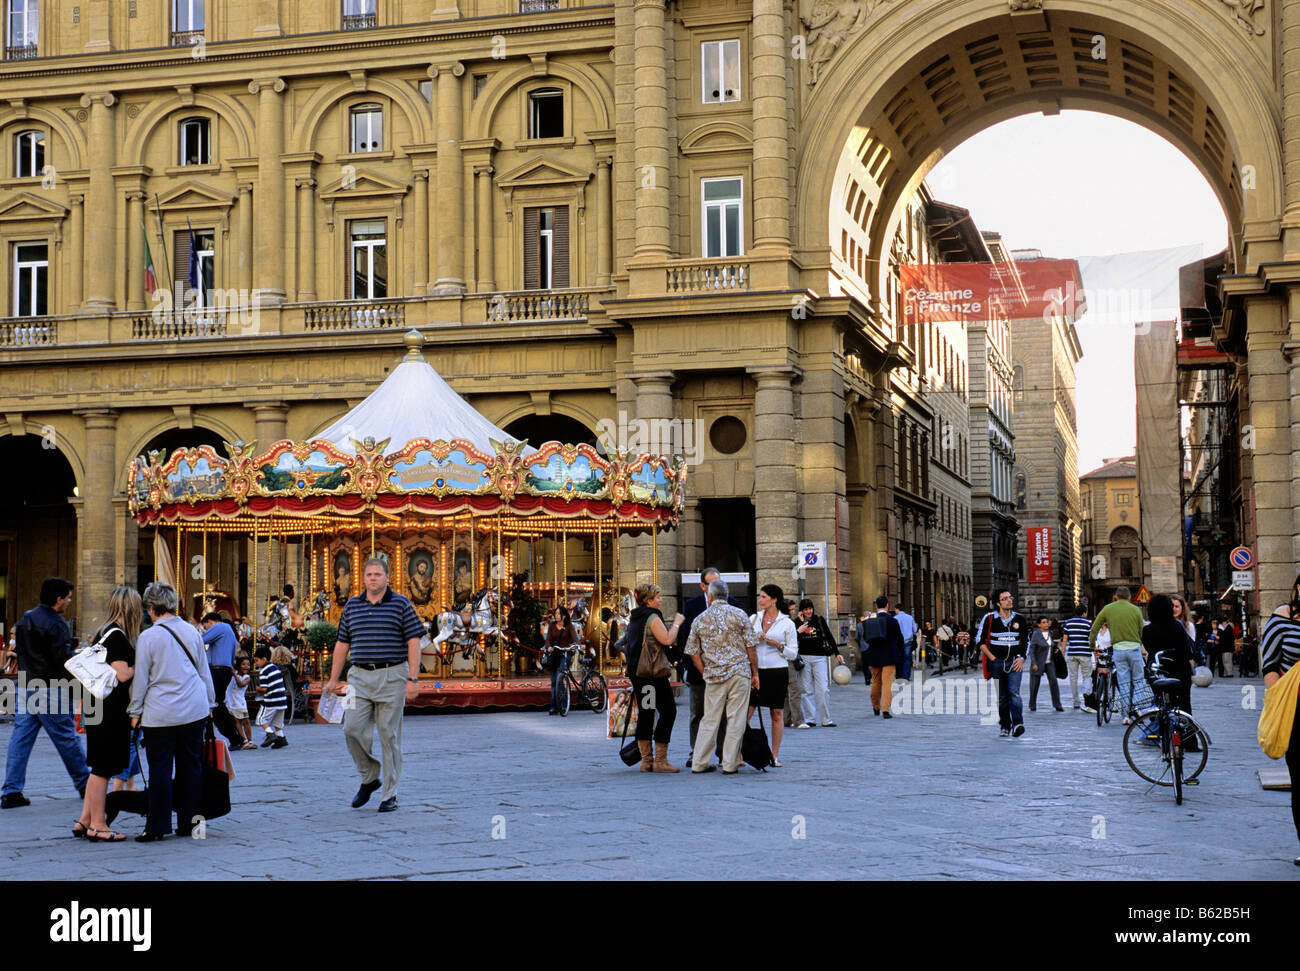 Triumphal Arch and Carousel, Piazza della Republbica, Florence, Firenze, Tuscany, Italy, Europe Stock Photo